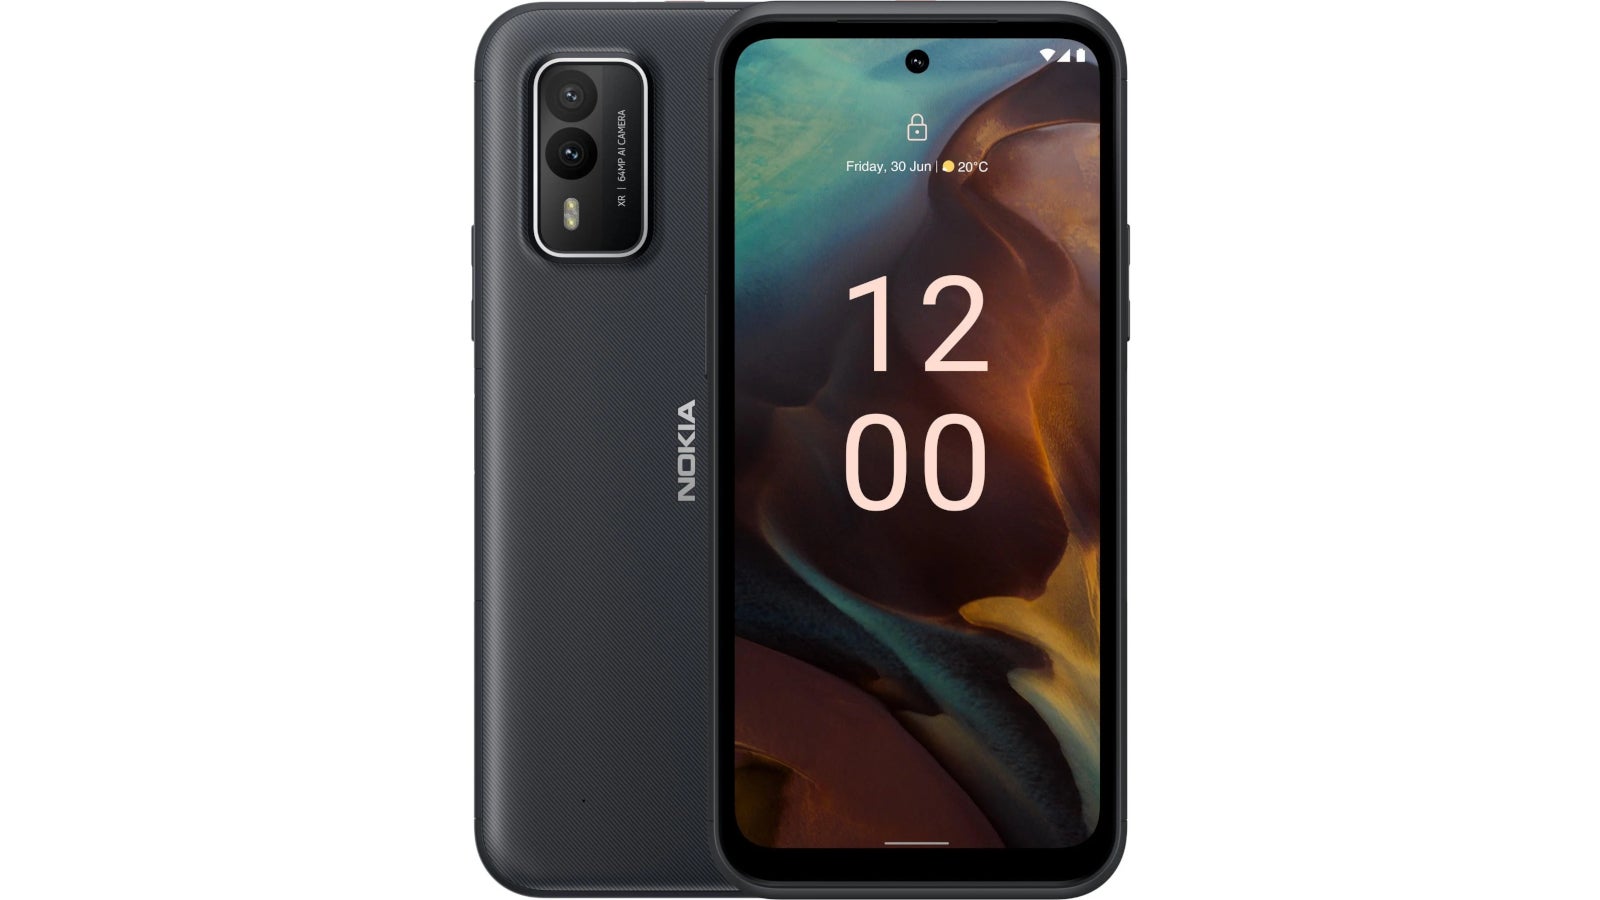 Nokia XR21 - HMD launches its first rugged smartphone, a rebranded Nokia XR21